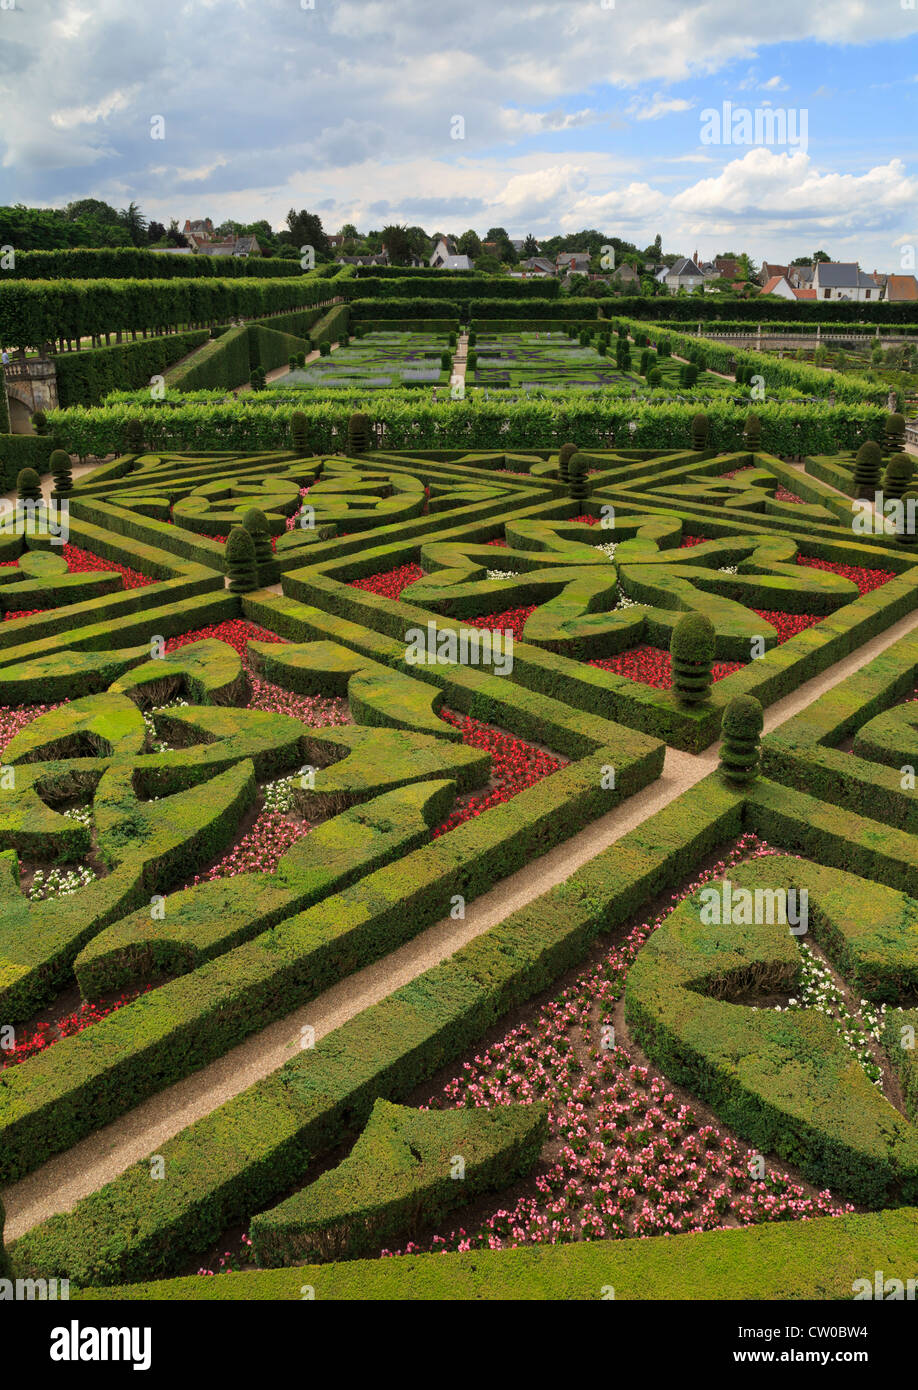 Chateau de Villandry, Loire Valley, France. The late renaissance chateau is most famous for its restored gardens Stock Photo